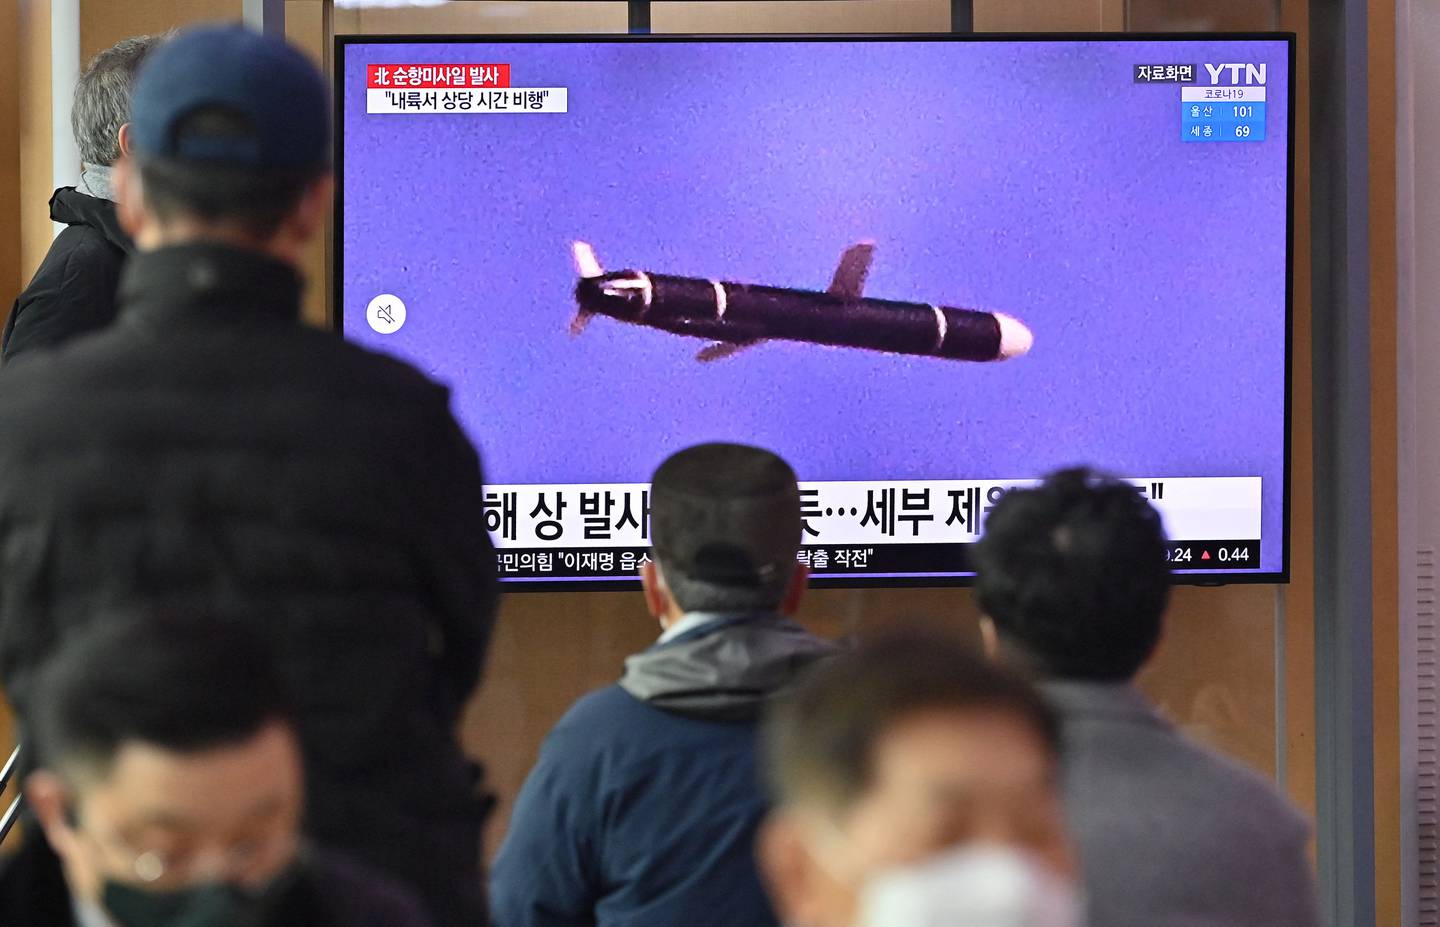 People watch a news broadcast on a North Korean missile test, at a railway station in Seoul on January 25, 2022. AFP